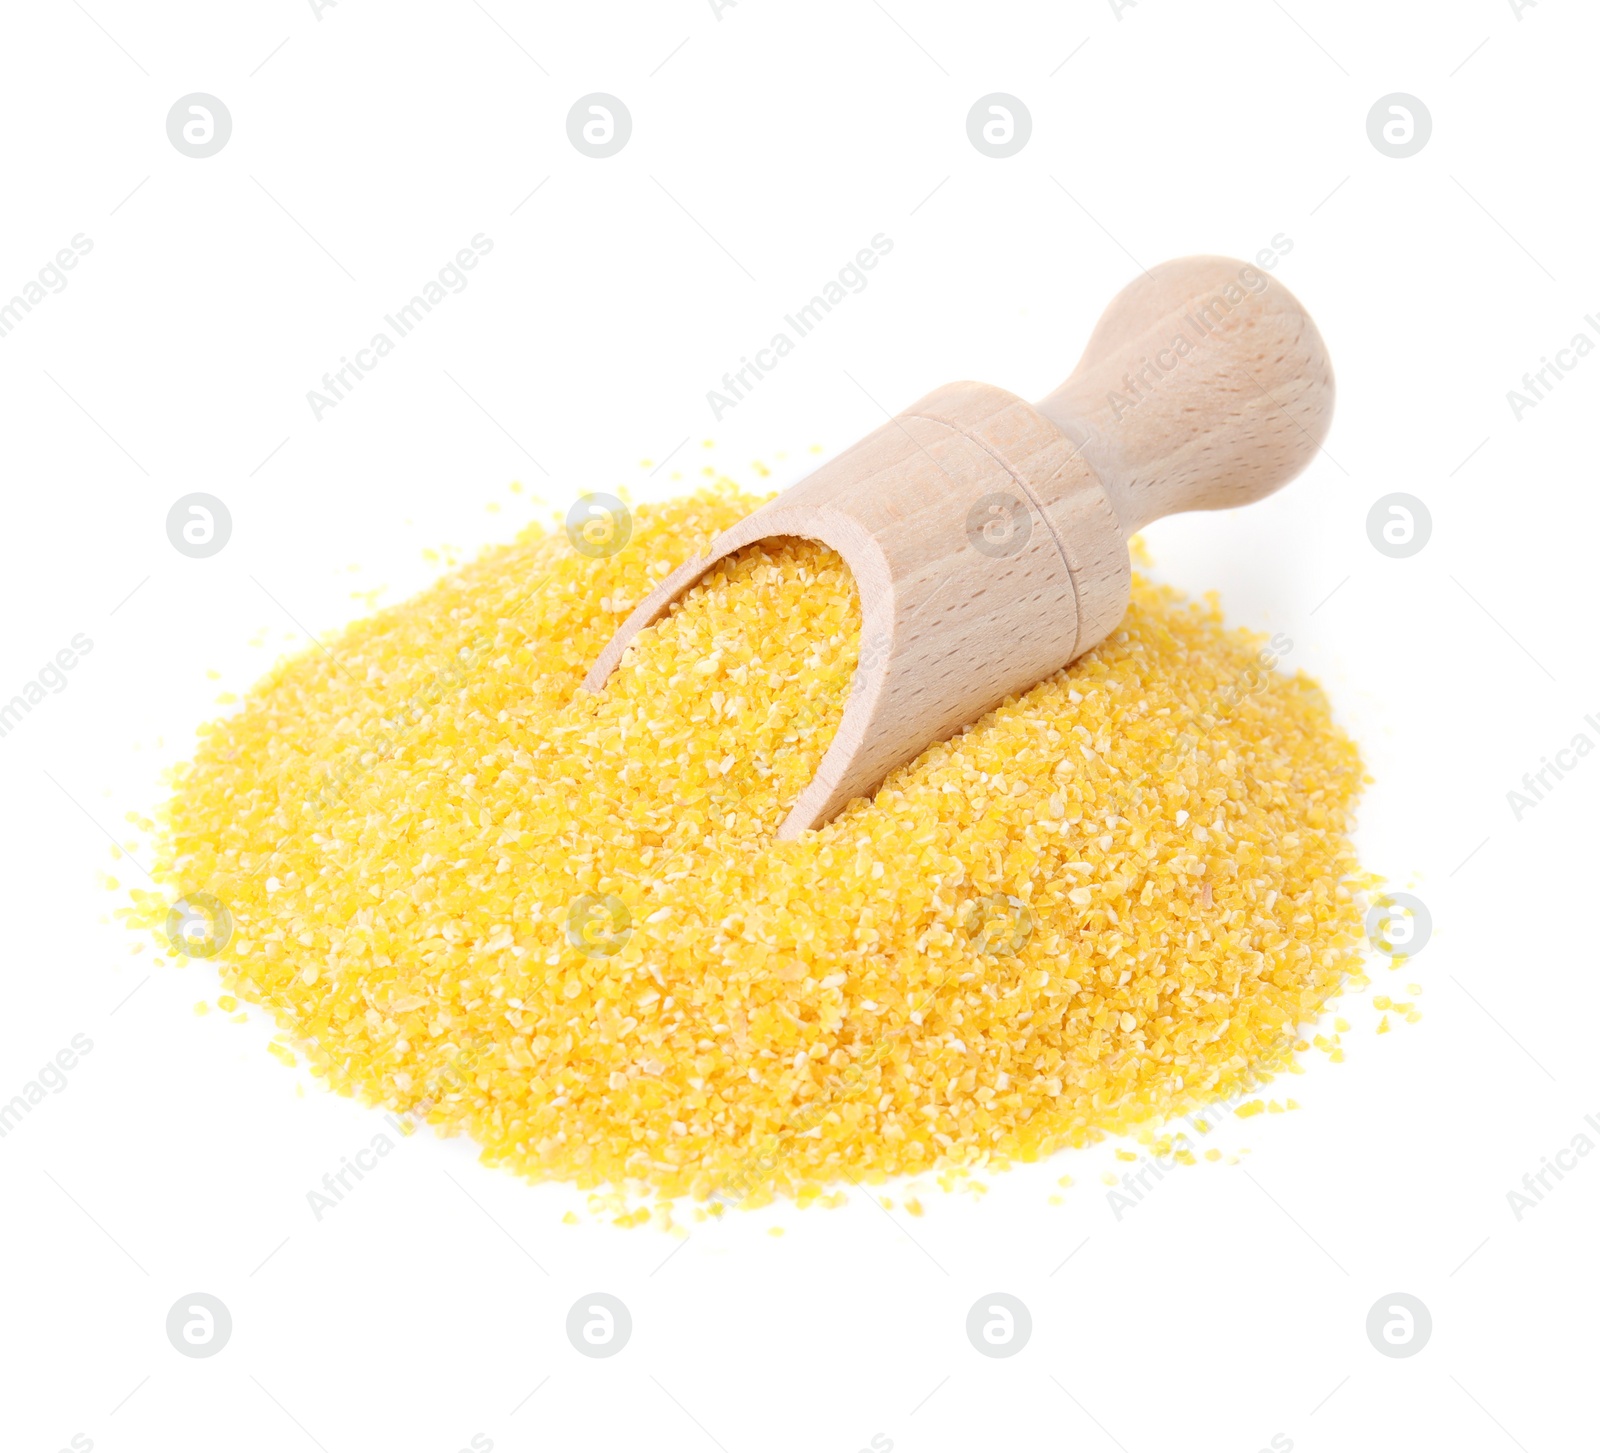 Photo of Pile of raw cornmeal and scoop isolated on white